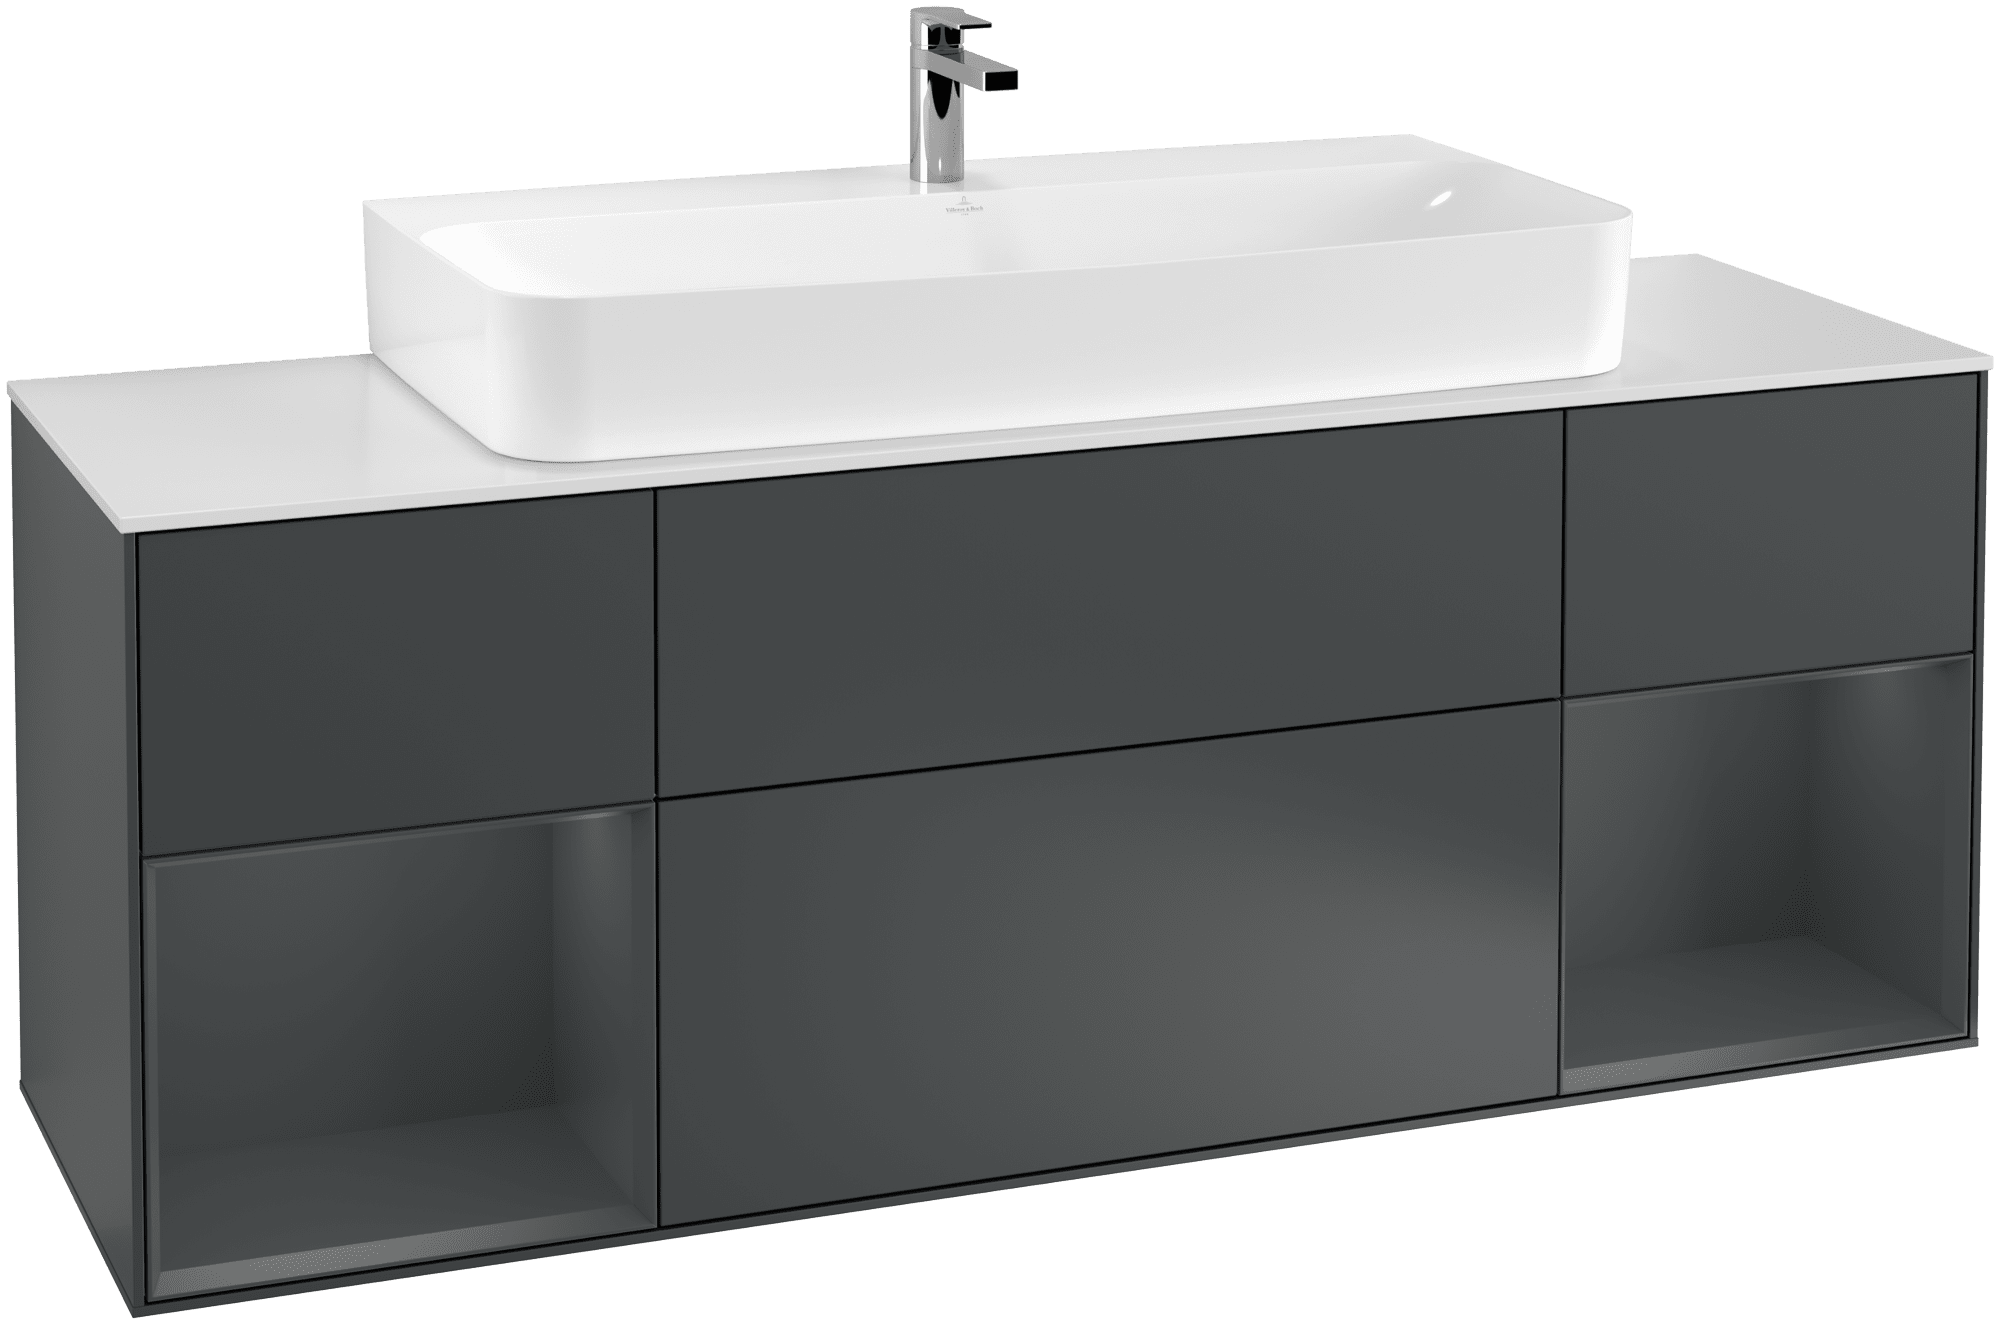 VILLEROY BOCH Finion Vanity unit, with lighting, 4 pull-out compartments, 1600 x 603 x 501 mm, Midnight Blue Matt Lacquer / Midnight Blue Matt Lacquer / Glass White Matt #G211HGHG resmi